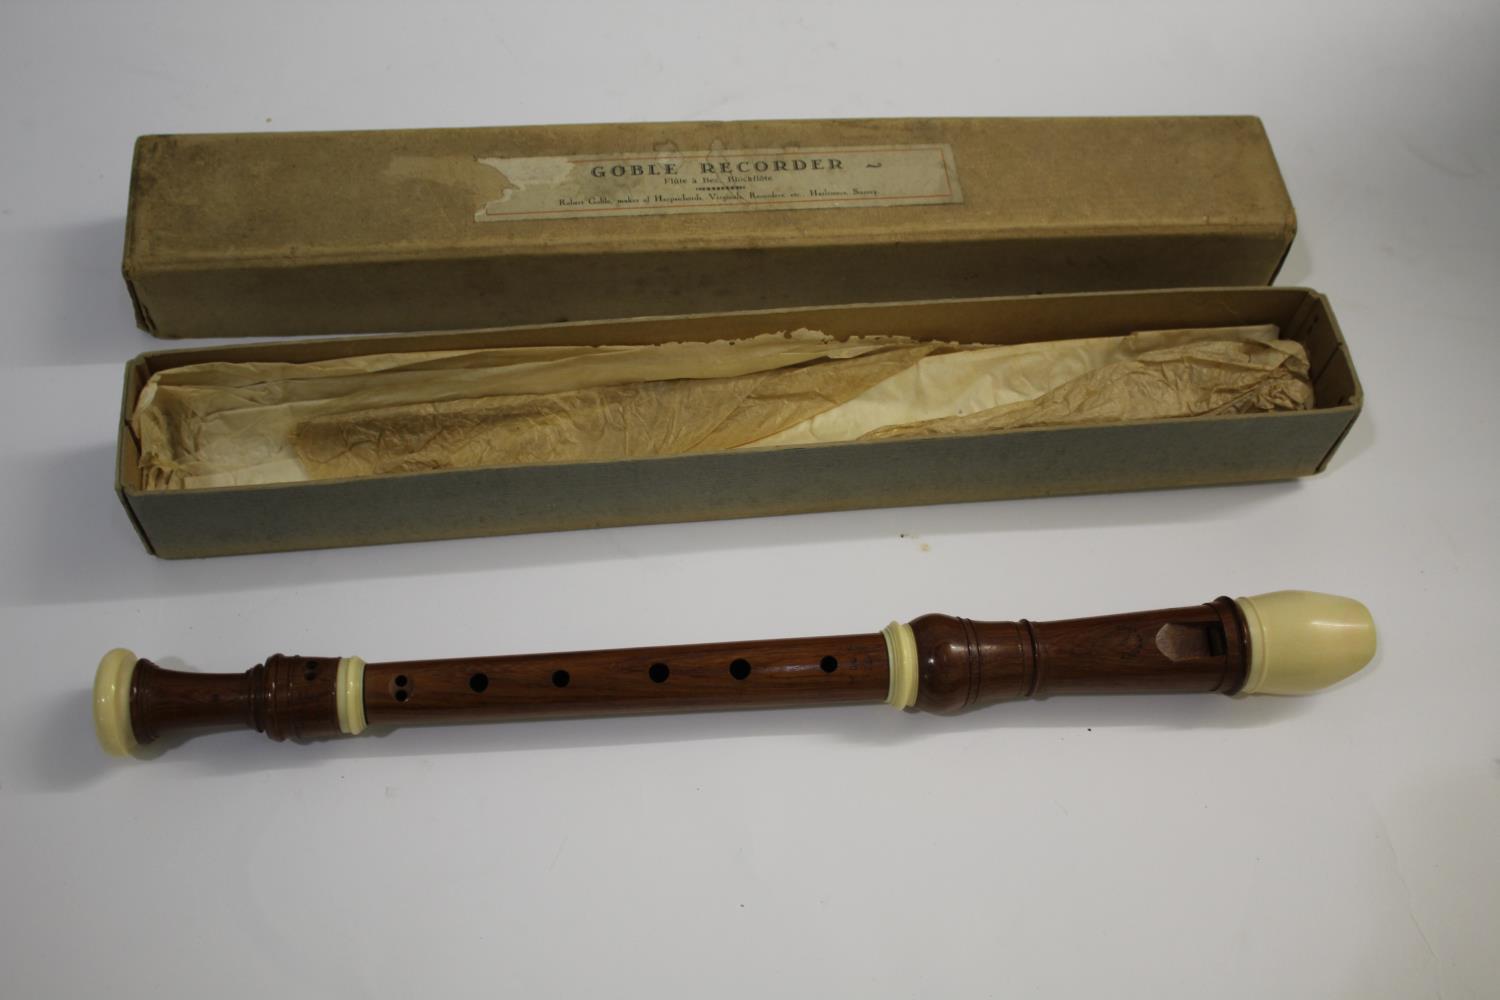 ROBERT GOBLE BOXED IVORY & WOODEN RECORDER a wooden recorder with ivory mouthpiece and ivory - Image 5 of 22